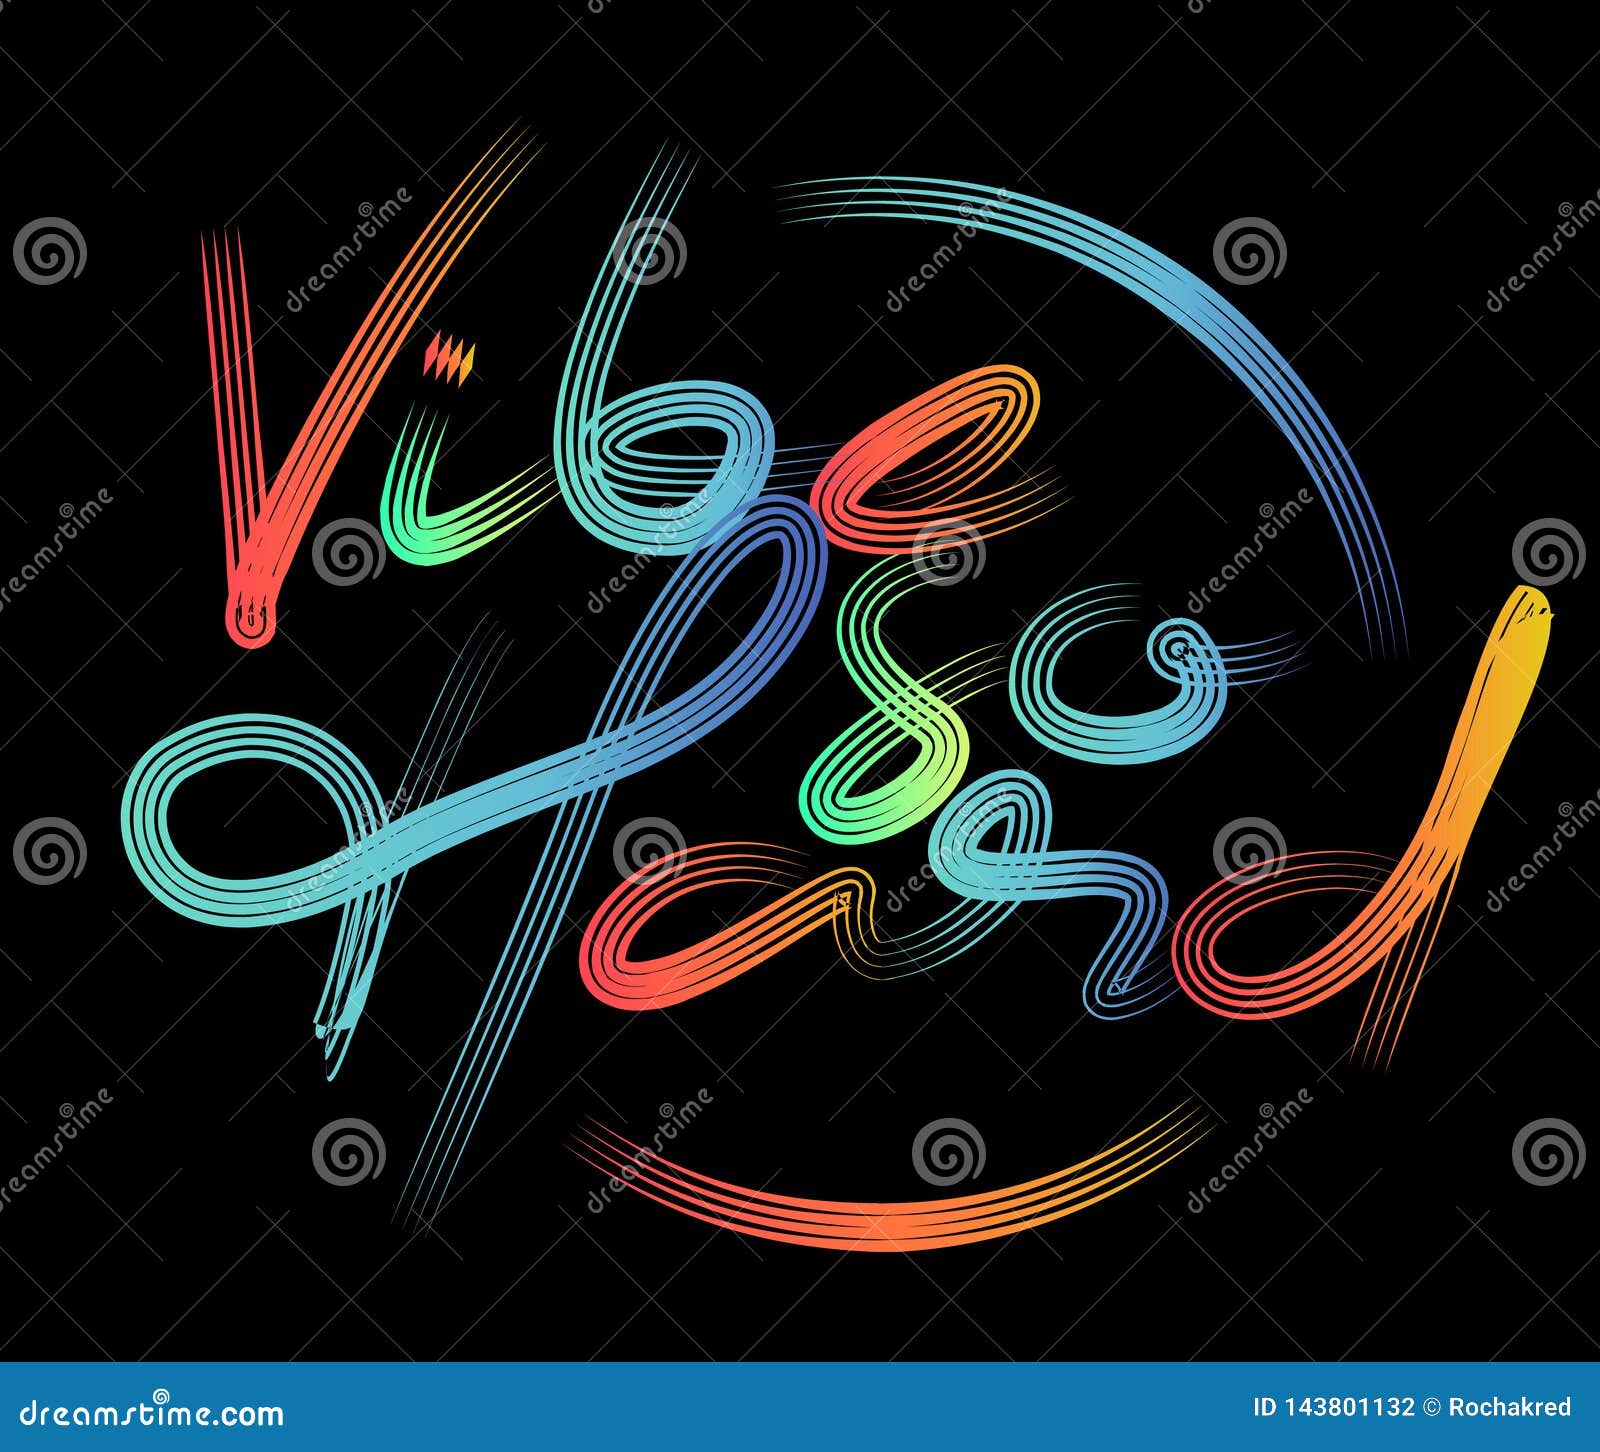 vibe so hard calligraphic modern font style text